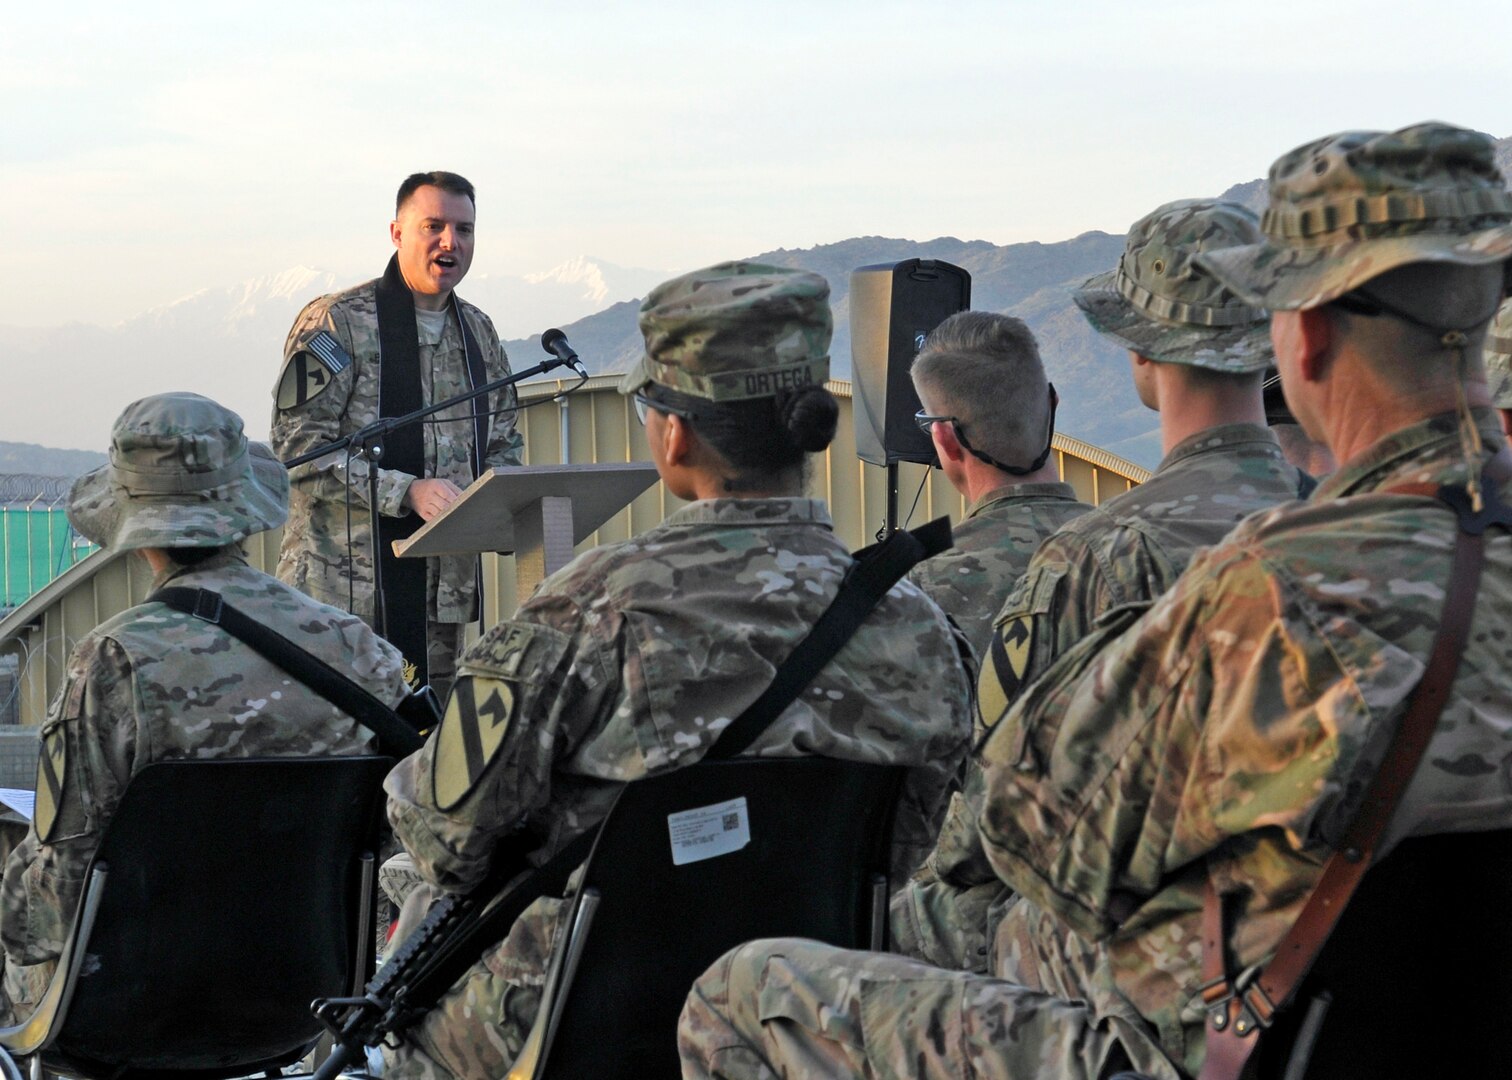 U.S. Army Chaplain (Maj.) Steve Prost, 4th Brigade Combat Team, 1st Cavalry Division, addresses soldiers and civilians during an Easter service at Forward Operating Base Gamberi in Laghman province, Afghanistan, March 31, 2013. DLA Troop Support provided a taste of home for deployed service members to enjoy during their Easter meals and palms for observing Palm Sunday. 